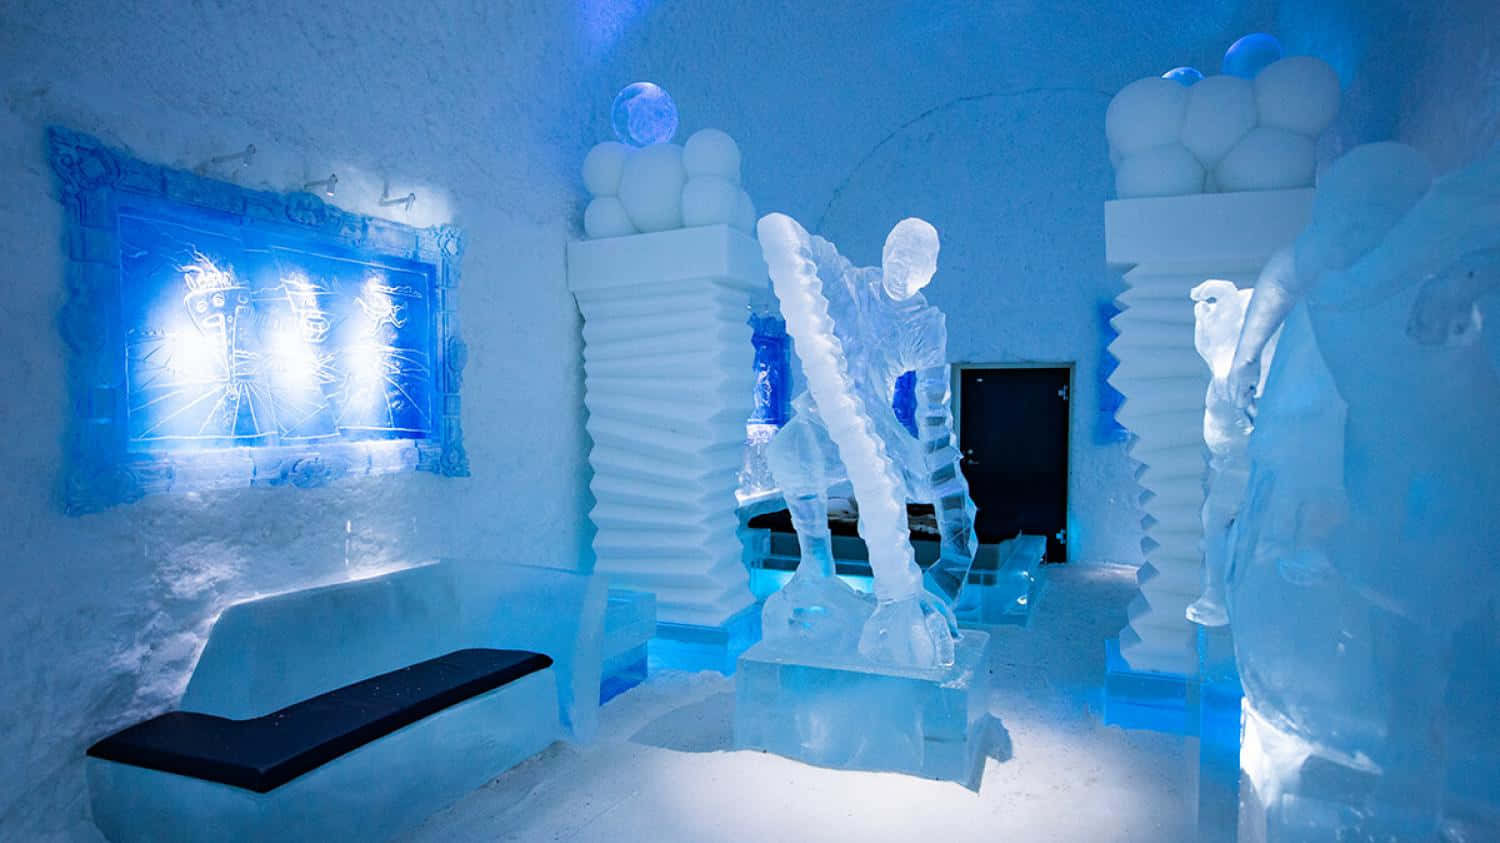 Majestic Ice Hotel with spectacular structure and ambiance Wallpaper